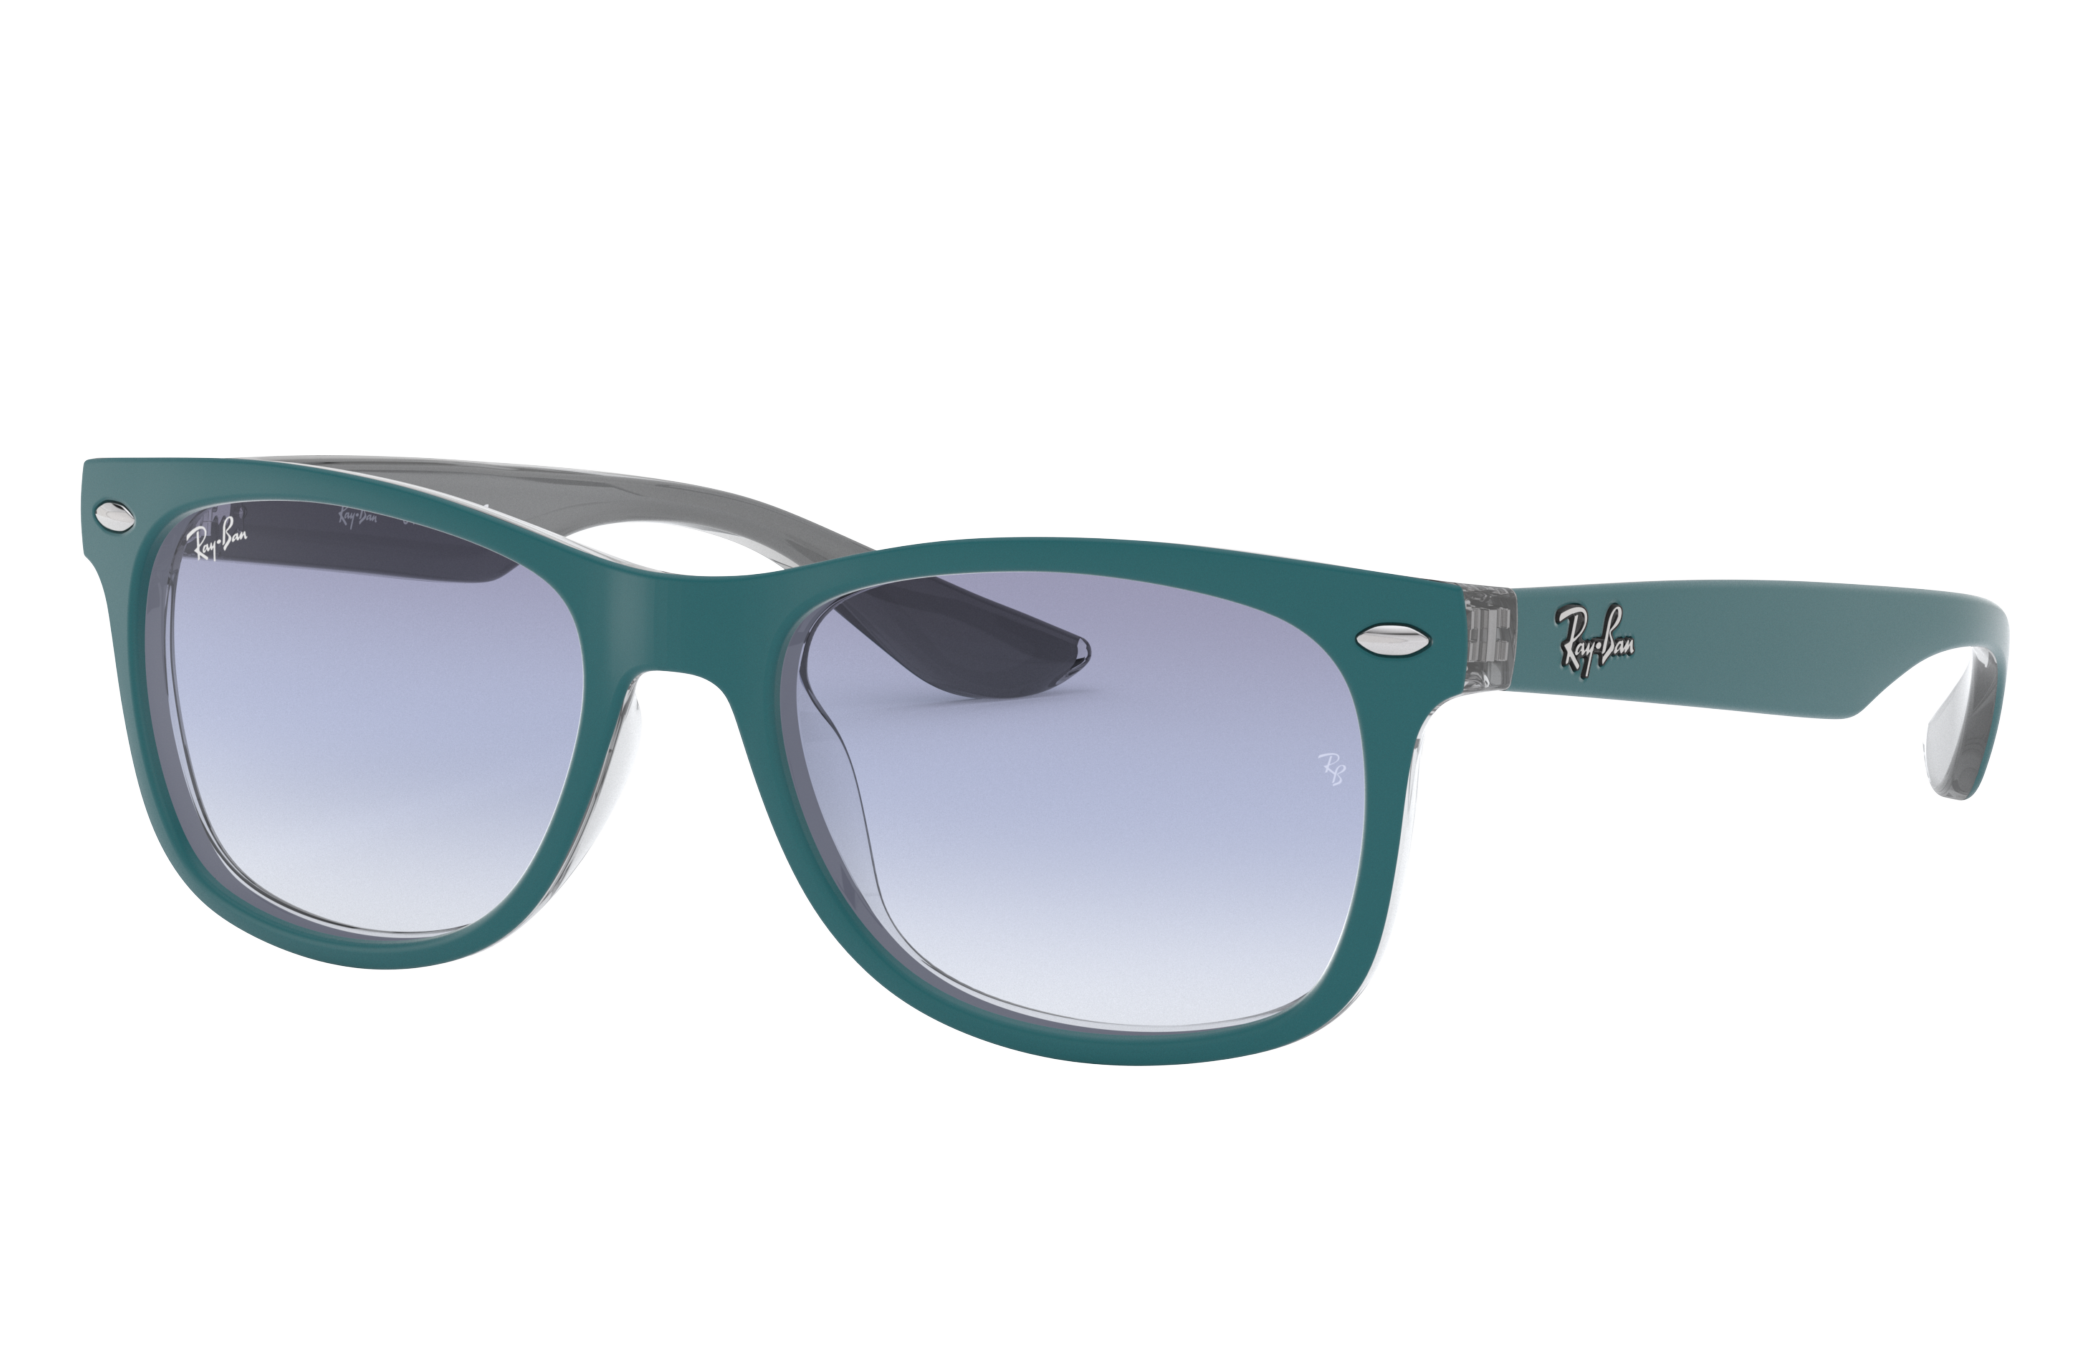 New Wayfarer Kids Sunglasses in Turquoise On Grey and Light Blue | Ray-Ban®